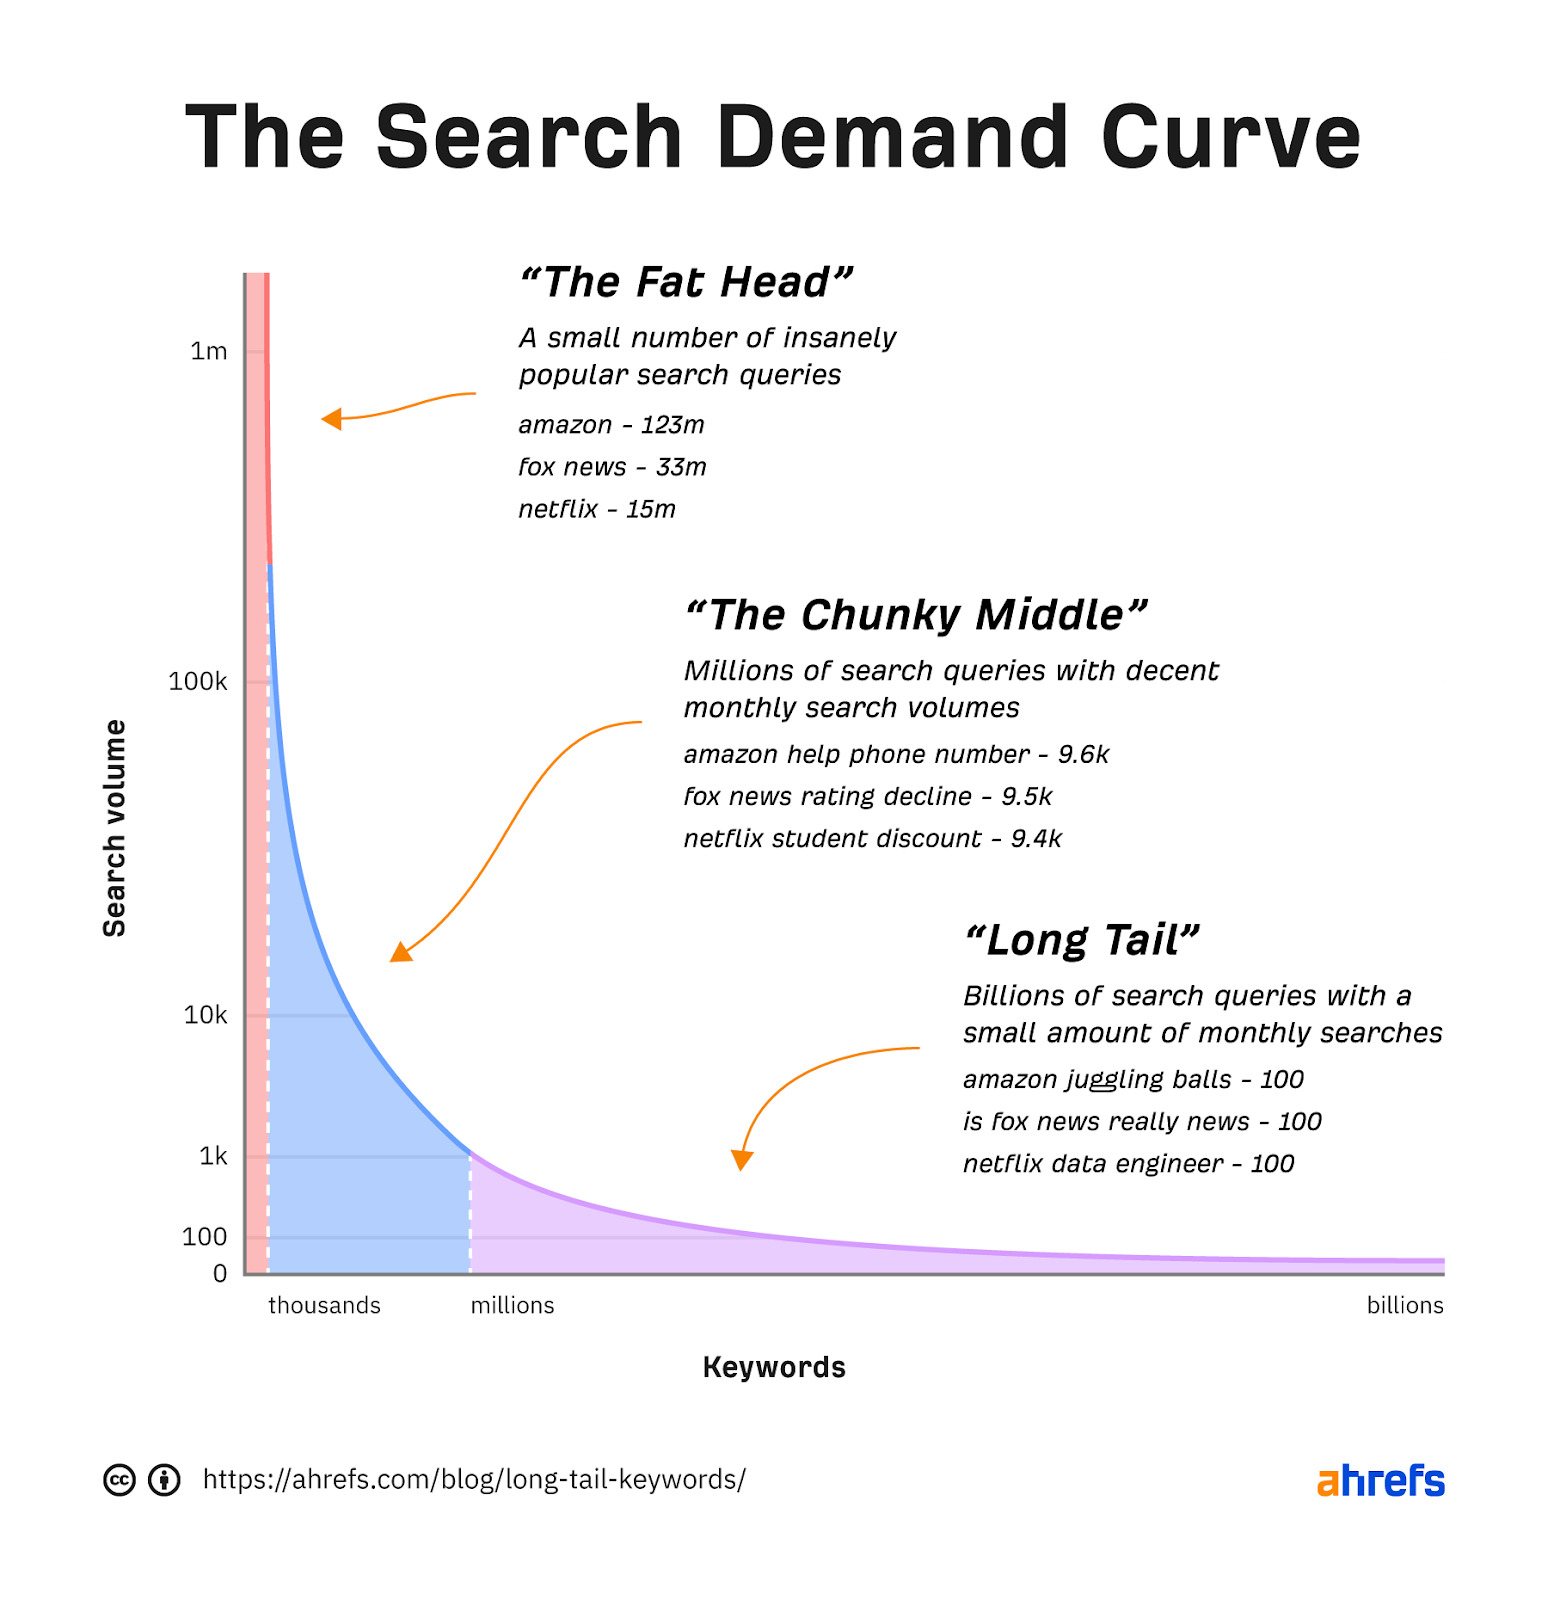 The Search Deman Curve from Ahrefs